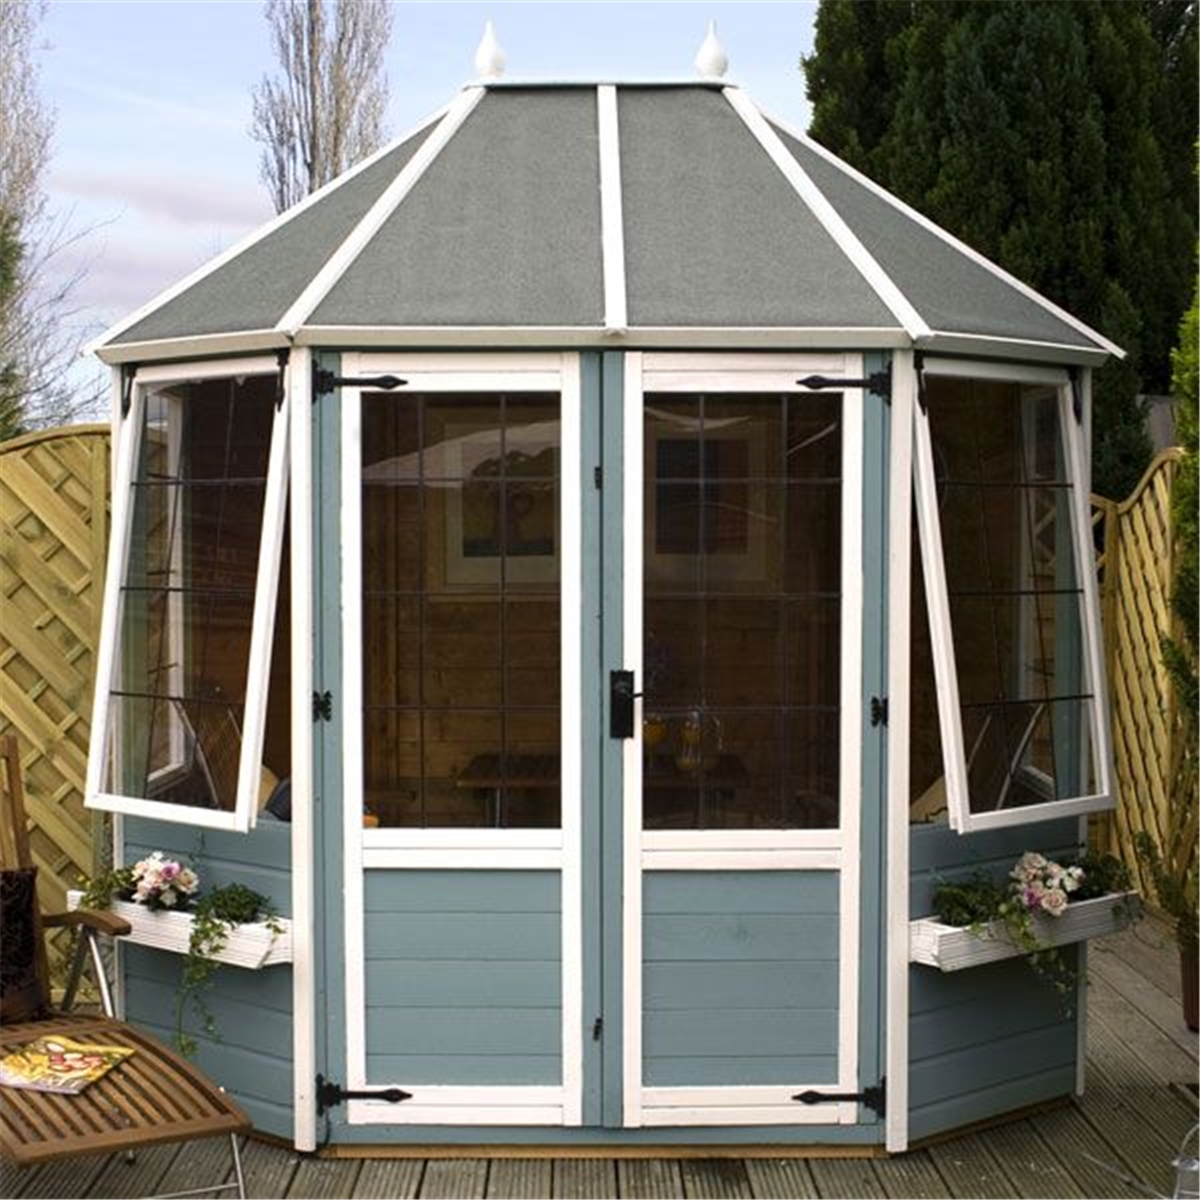 8 x 6 avon octagonal summerhouse 12mm tongue and groove